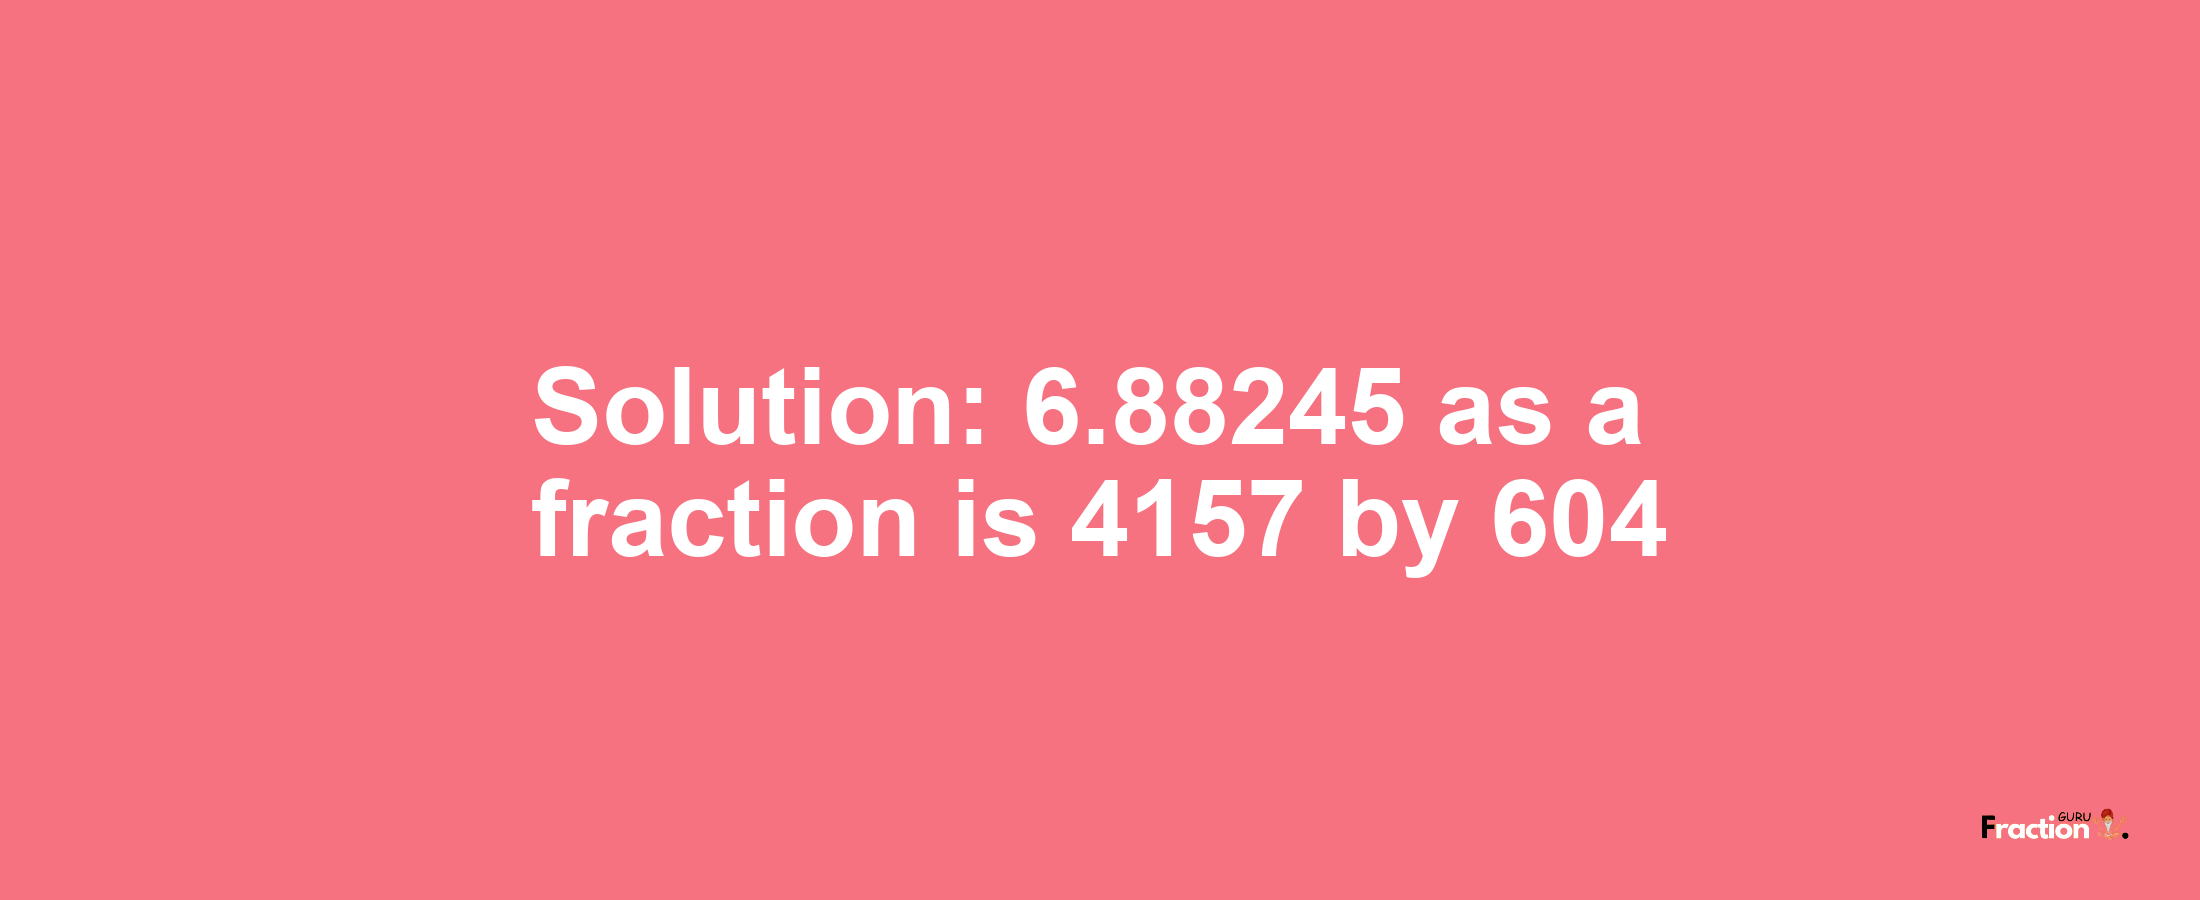 Solution:6.88245 as a fraction is 4157/604